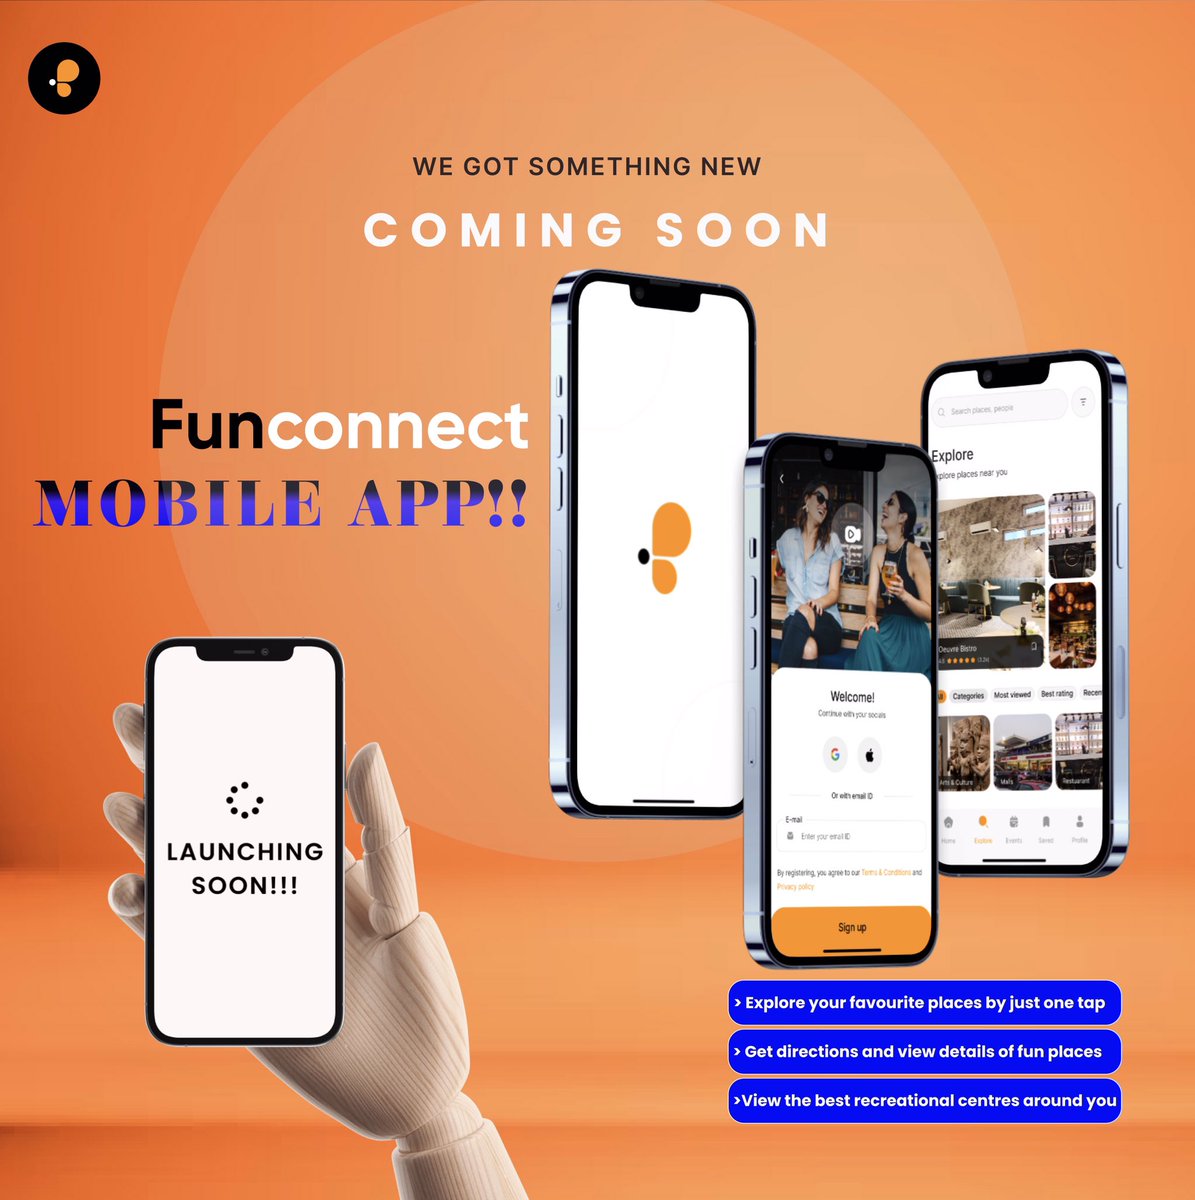 🌟 We’re thrilled to announce the upcoming release of our brand-new mobile app that will connect you to fun places right in your neighborhood & beyond. Whether you’re an iOS or Android user, get ready to embark on experiences with just a tap. Stay tuned for the big launch 🗺 📱